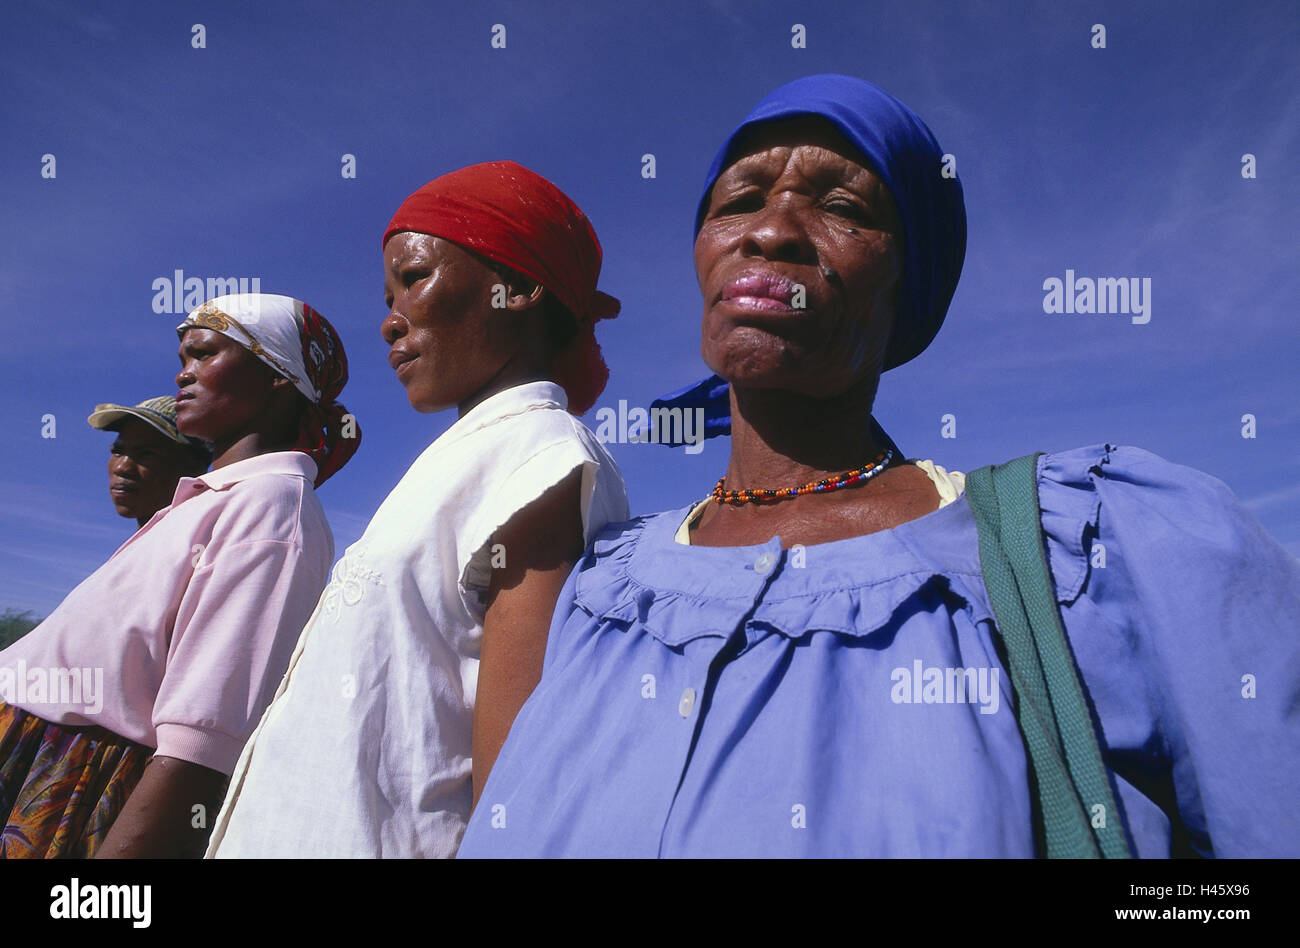 Botswana, women, portraits, clothes, brightly, clothes, headscarfs, headgear, locals, heavens, cloudless, blue, people, Stock Photo